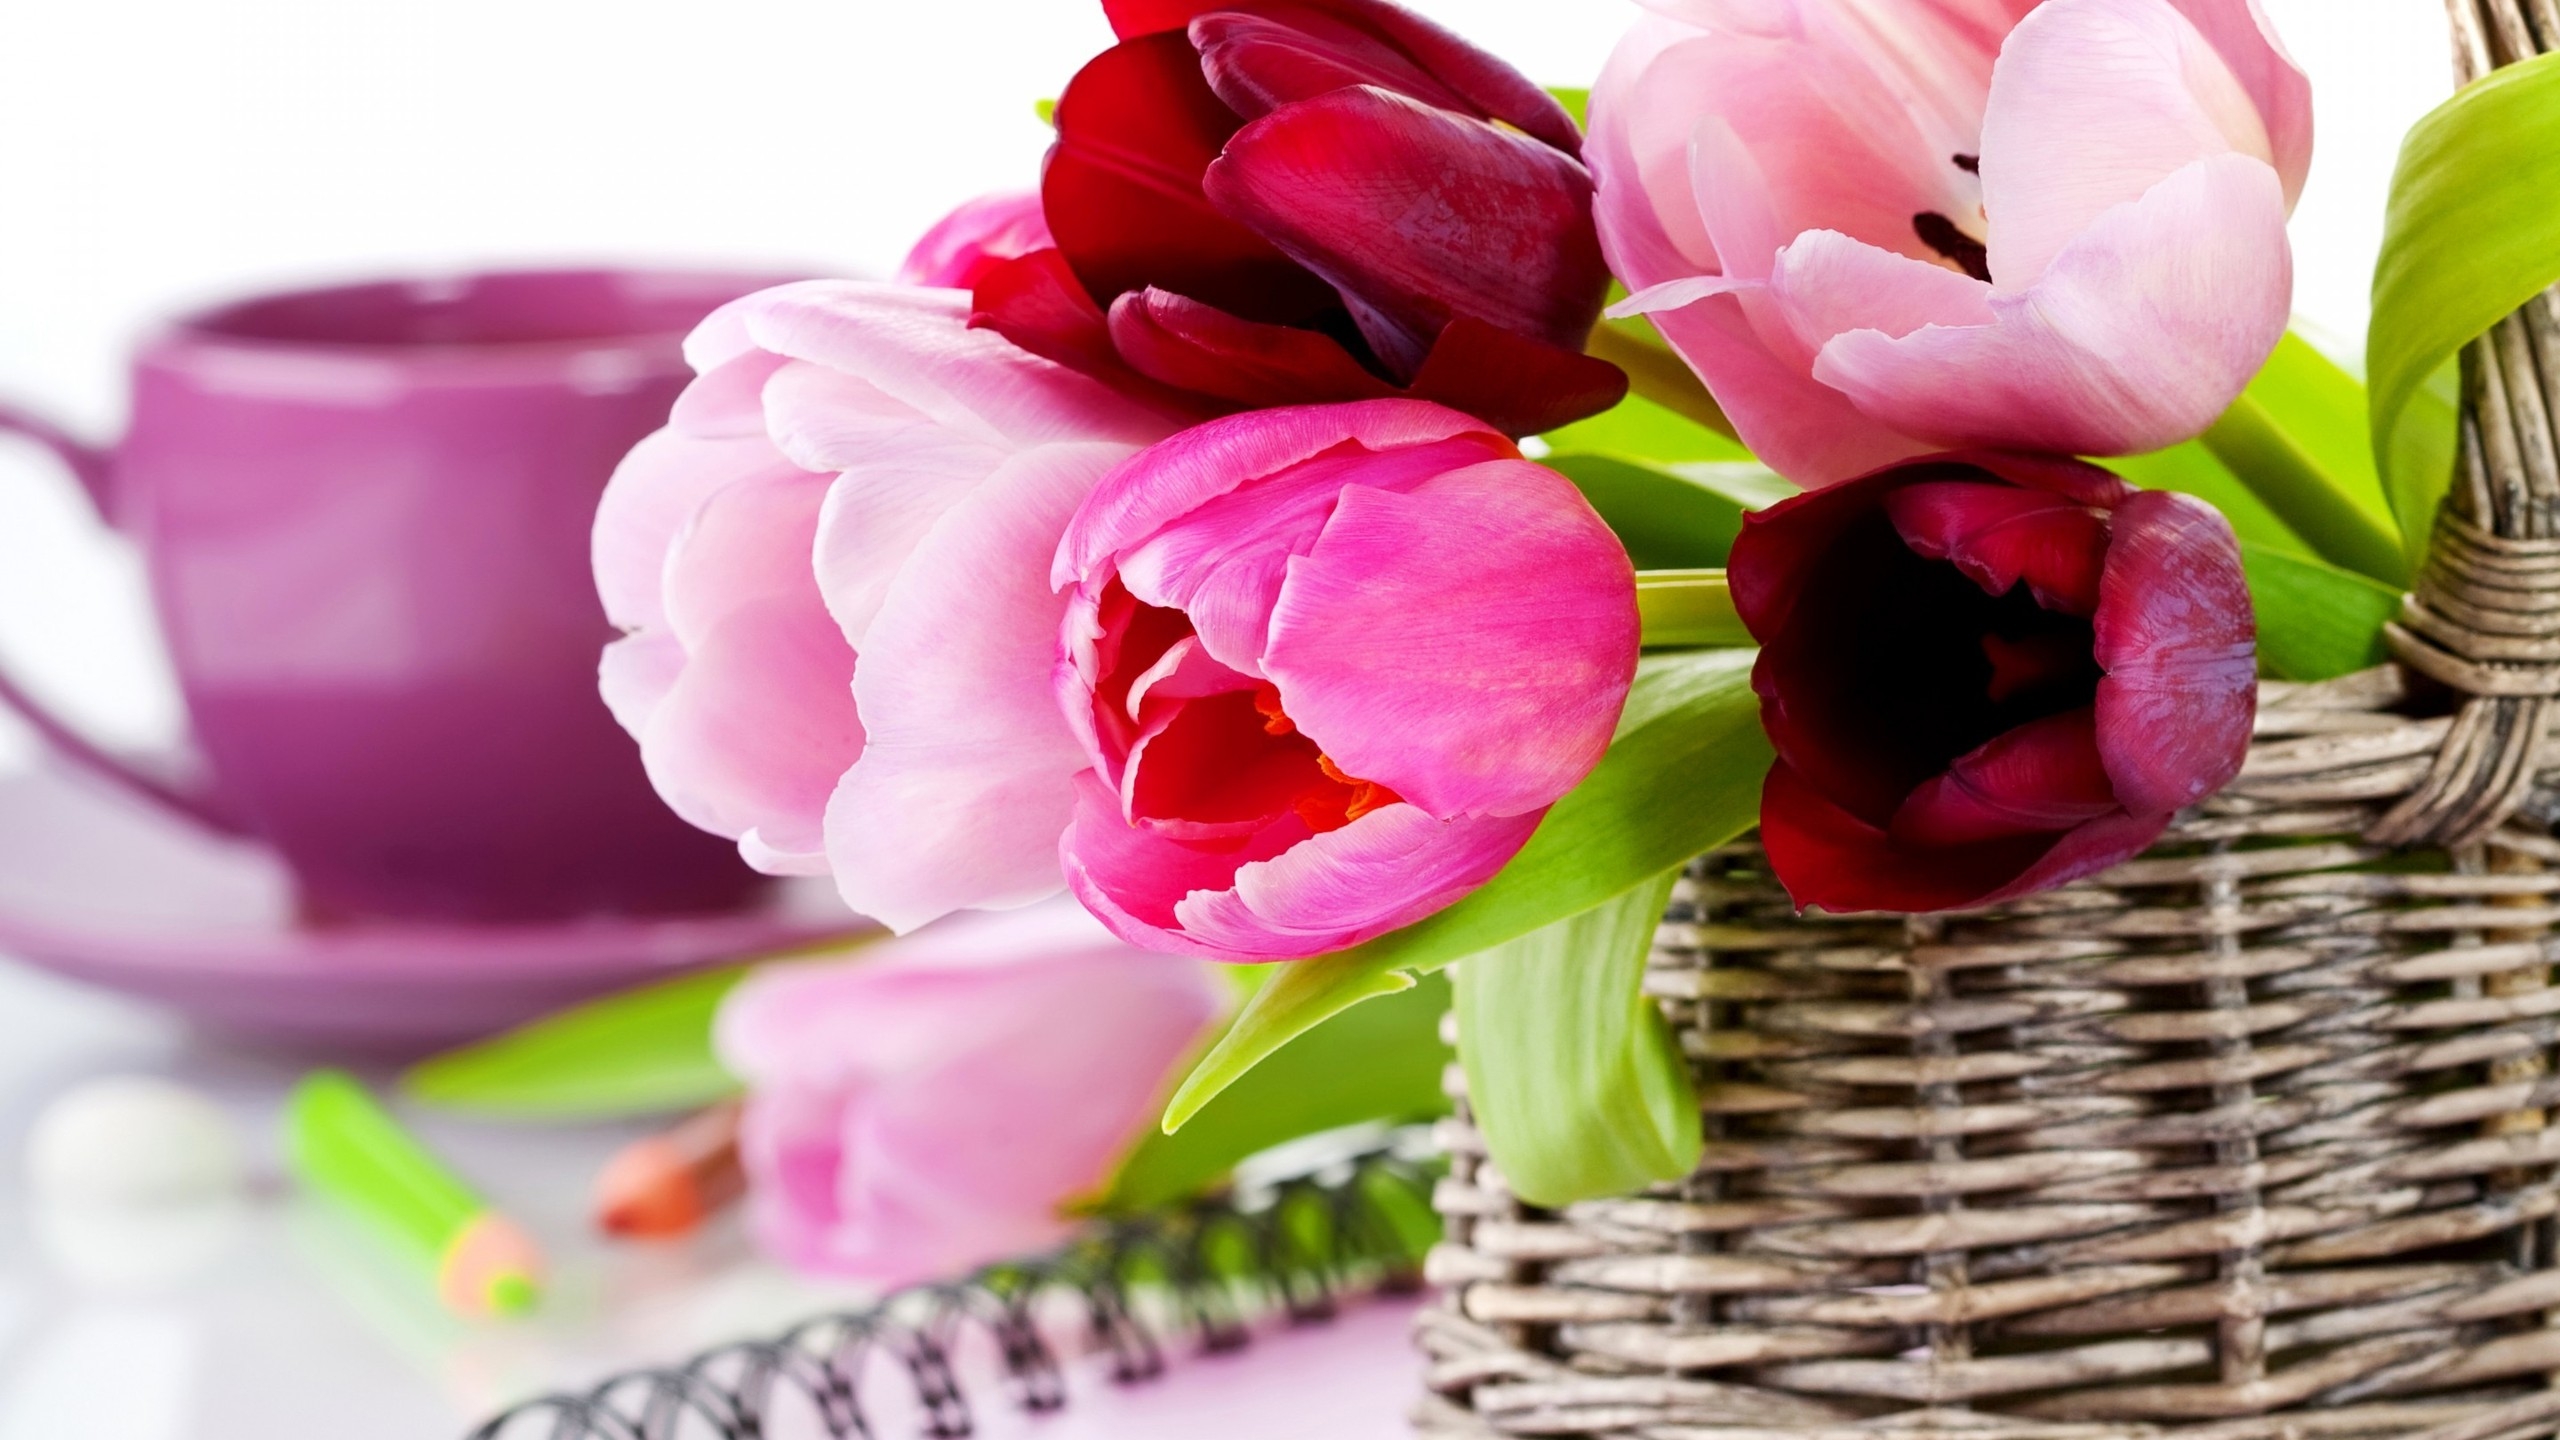 Gorgeous Tulips Basket for 2560x1440 HDTV resolution